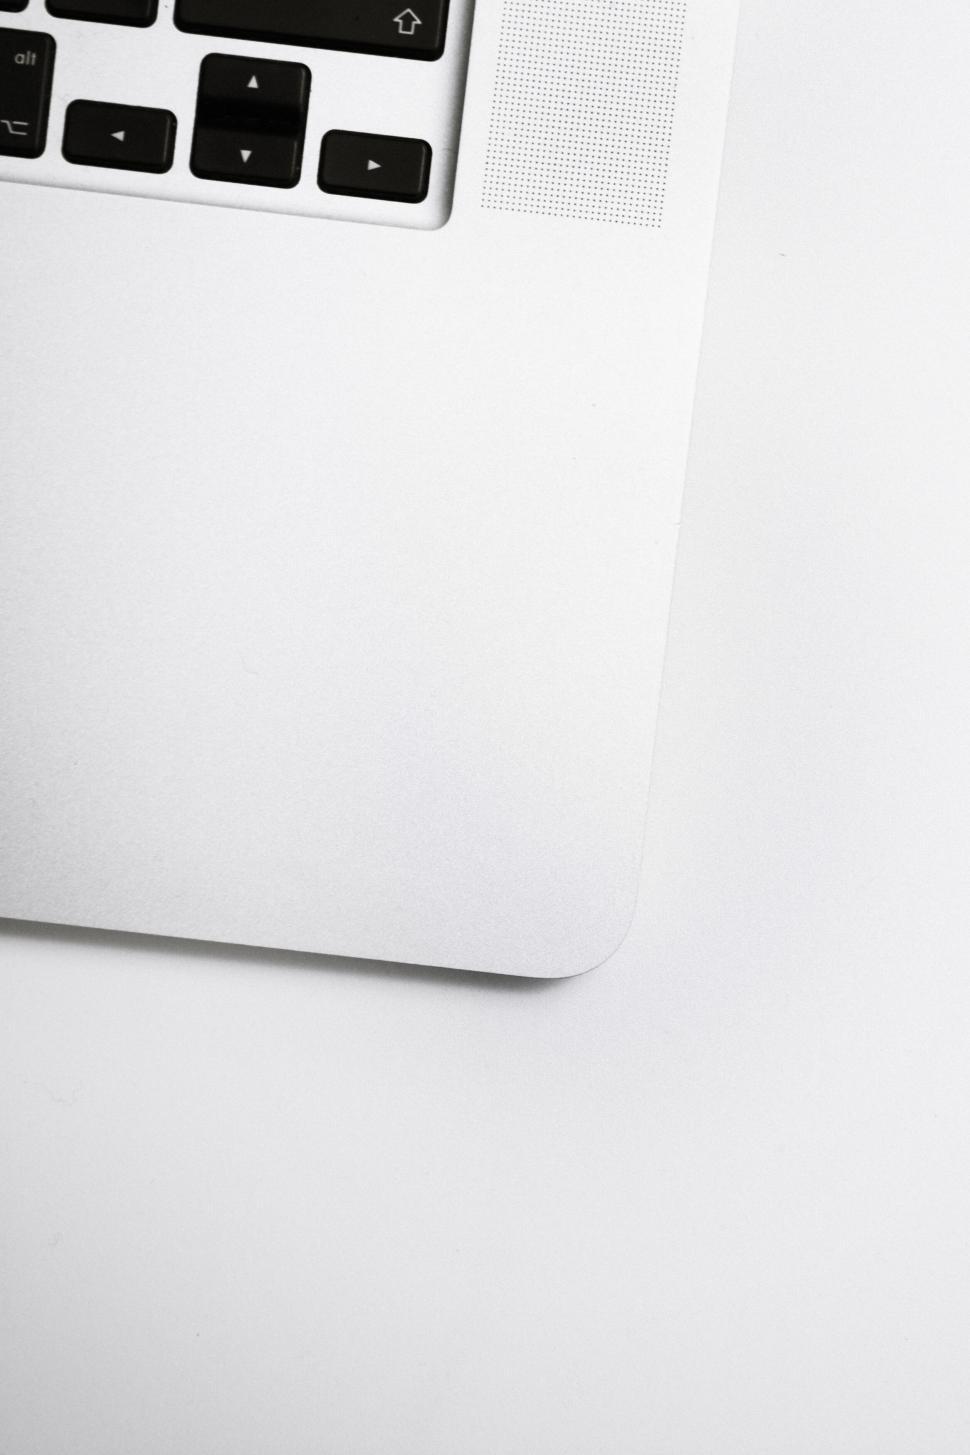 Free Image of A close up of a white surface 